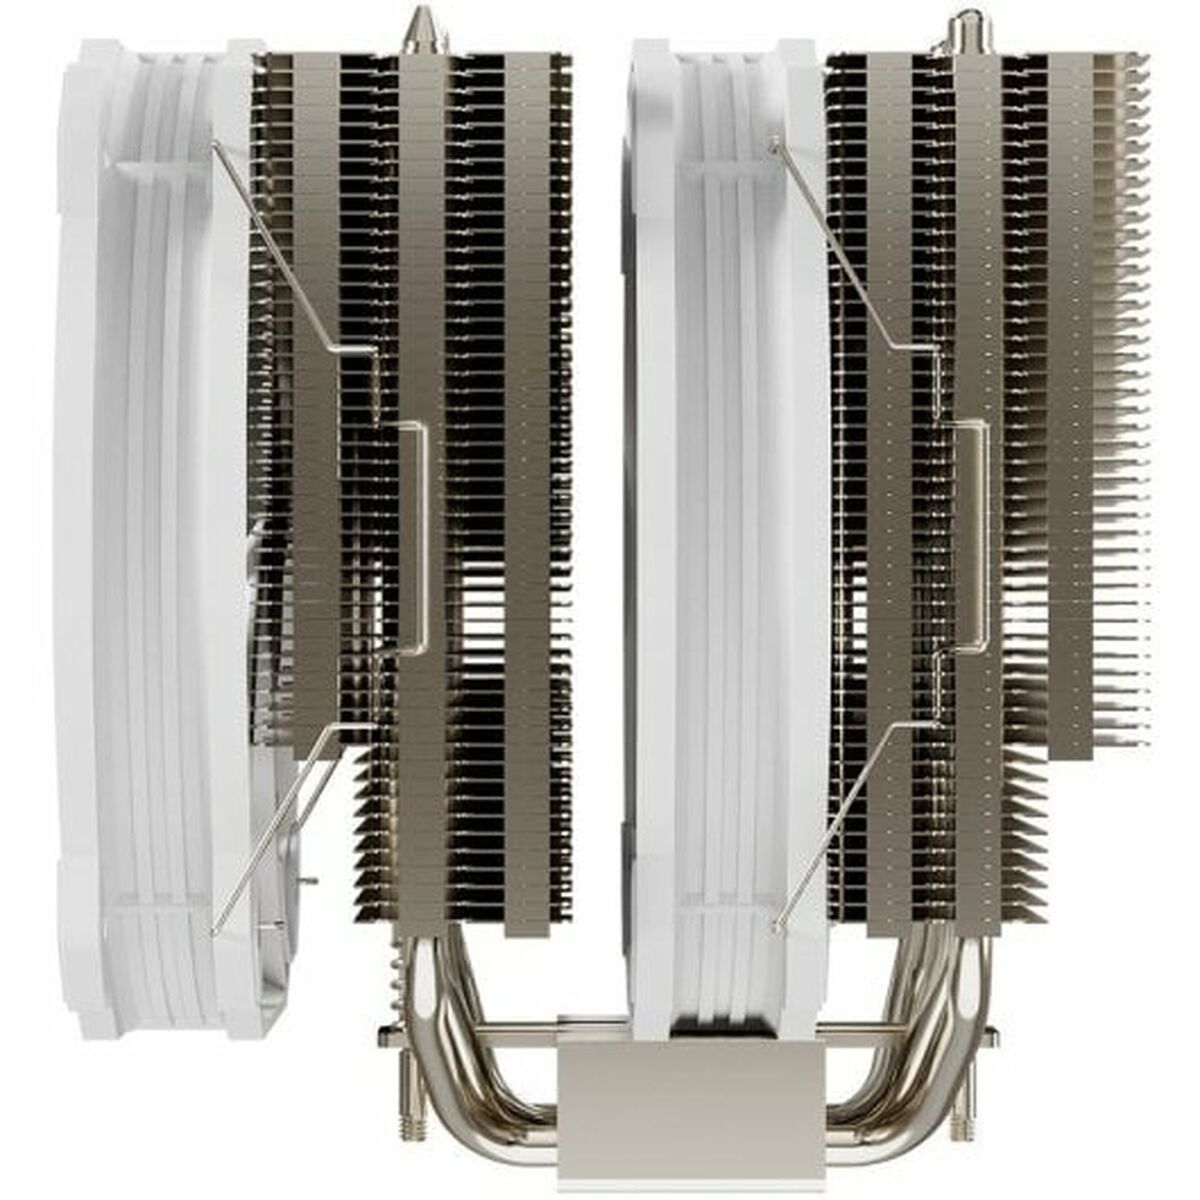 CPU Fan Forgeon, Forgeon, Computing, Components, cpu-fan-forgeon-2, Brand_Forgeon, category-reference-2609, category-reference-2803, category-reference-2815, category-reference-t-19685, category-reference-t-19912, category-reference-t-21360, category-reference-t-25668, category-reference-t-29842, computers / components, Condition_NEW, Price_300 - 400, Teleworking, RiotNook